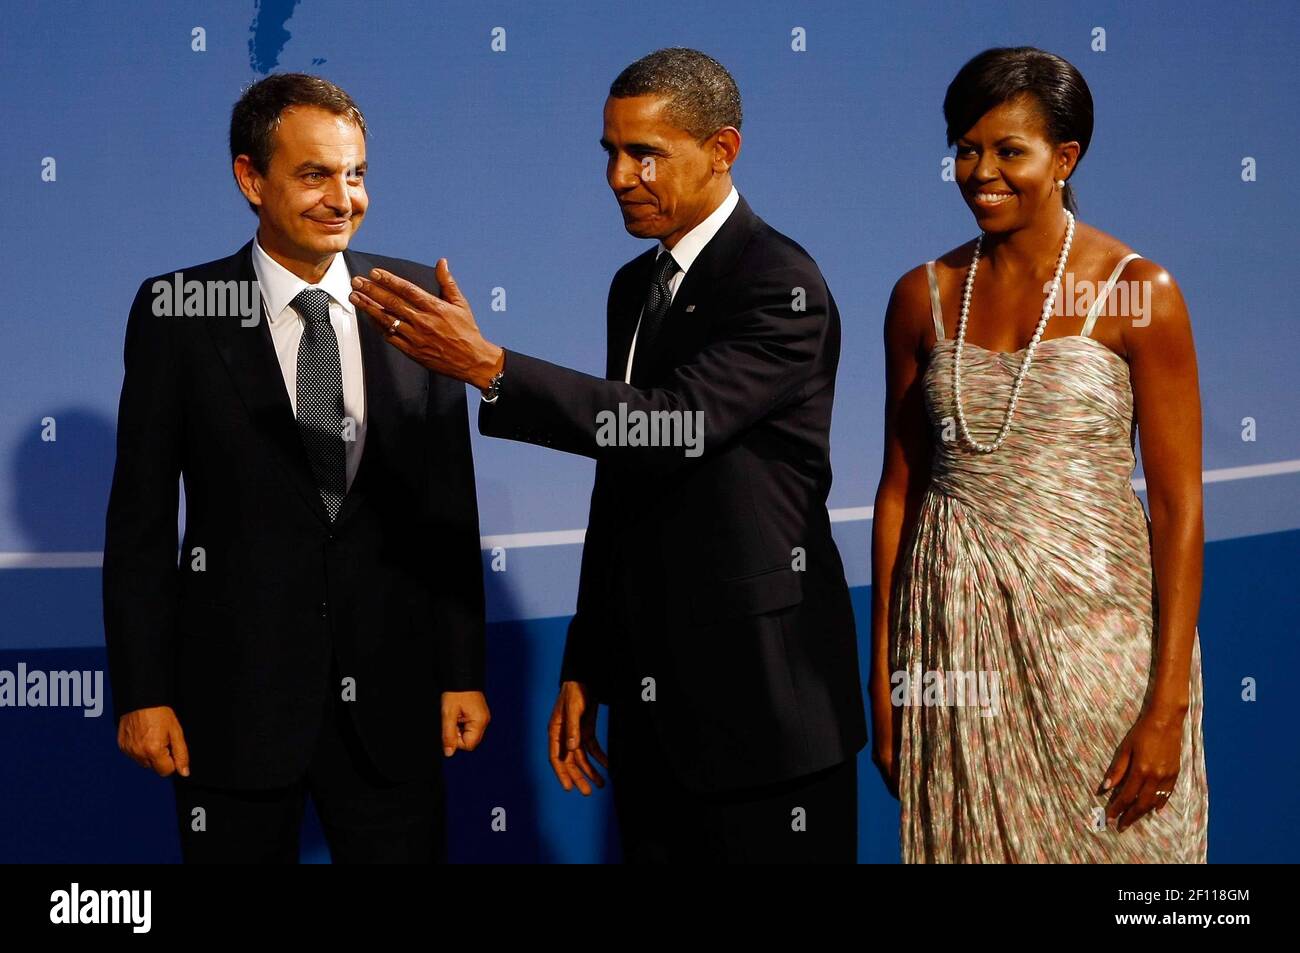 24 September 2009 - Pittsburgh, Pennsylvania - U.S. President Barack Obama (C) and U.S. first lady Michelle Obama (R) welcome Spanish President Jose Luis Rodriguez Zapatero to the welcoming dinner for G-20 leaders at the Phipps Conservatory on September 24, 2009 in Pittsburgh, Pennsylvania. Heads of state from the world's leading economic powers arrived today for the two-day G-20 summit held at the David L. Lawrence Convention Center aimed at promoting economic growth. Photo Credit: Win McNamee/Pool/Sipa Press/0909251423 Stock Photo